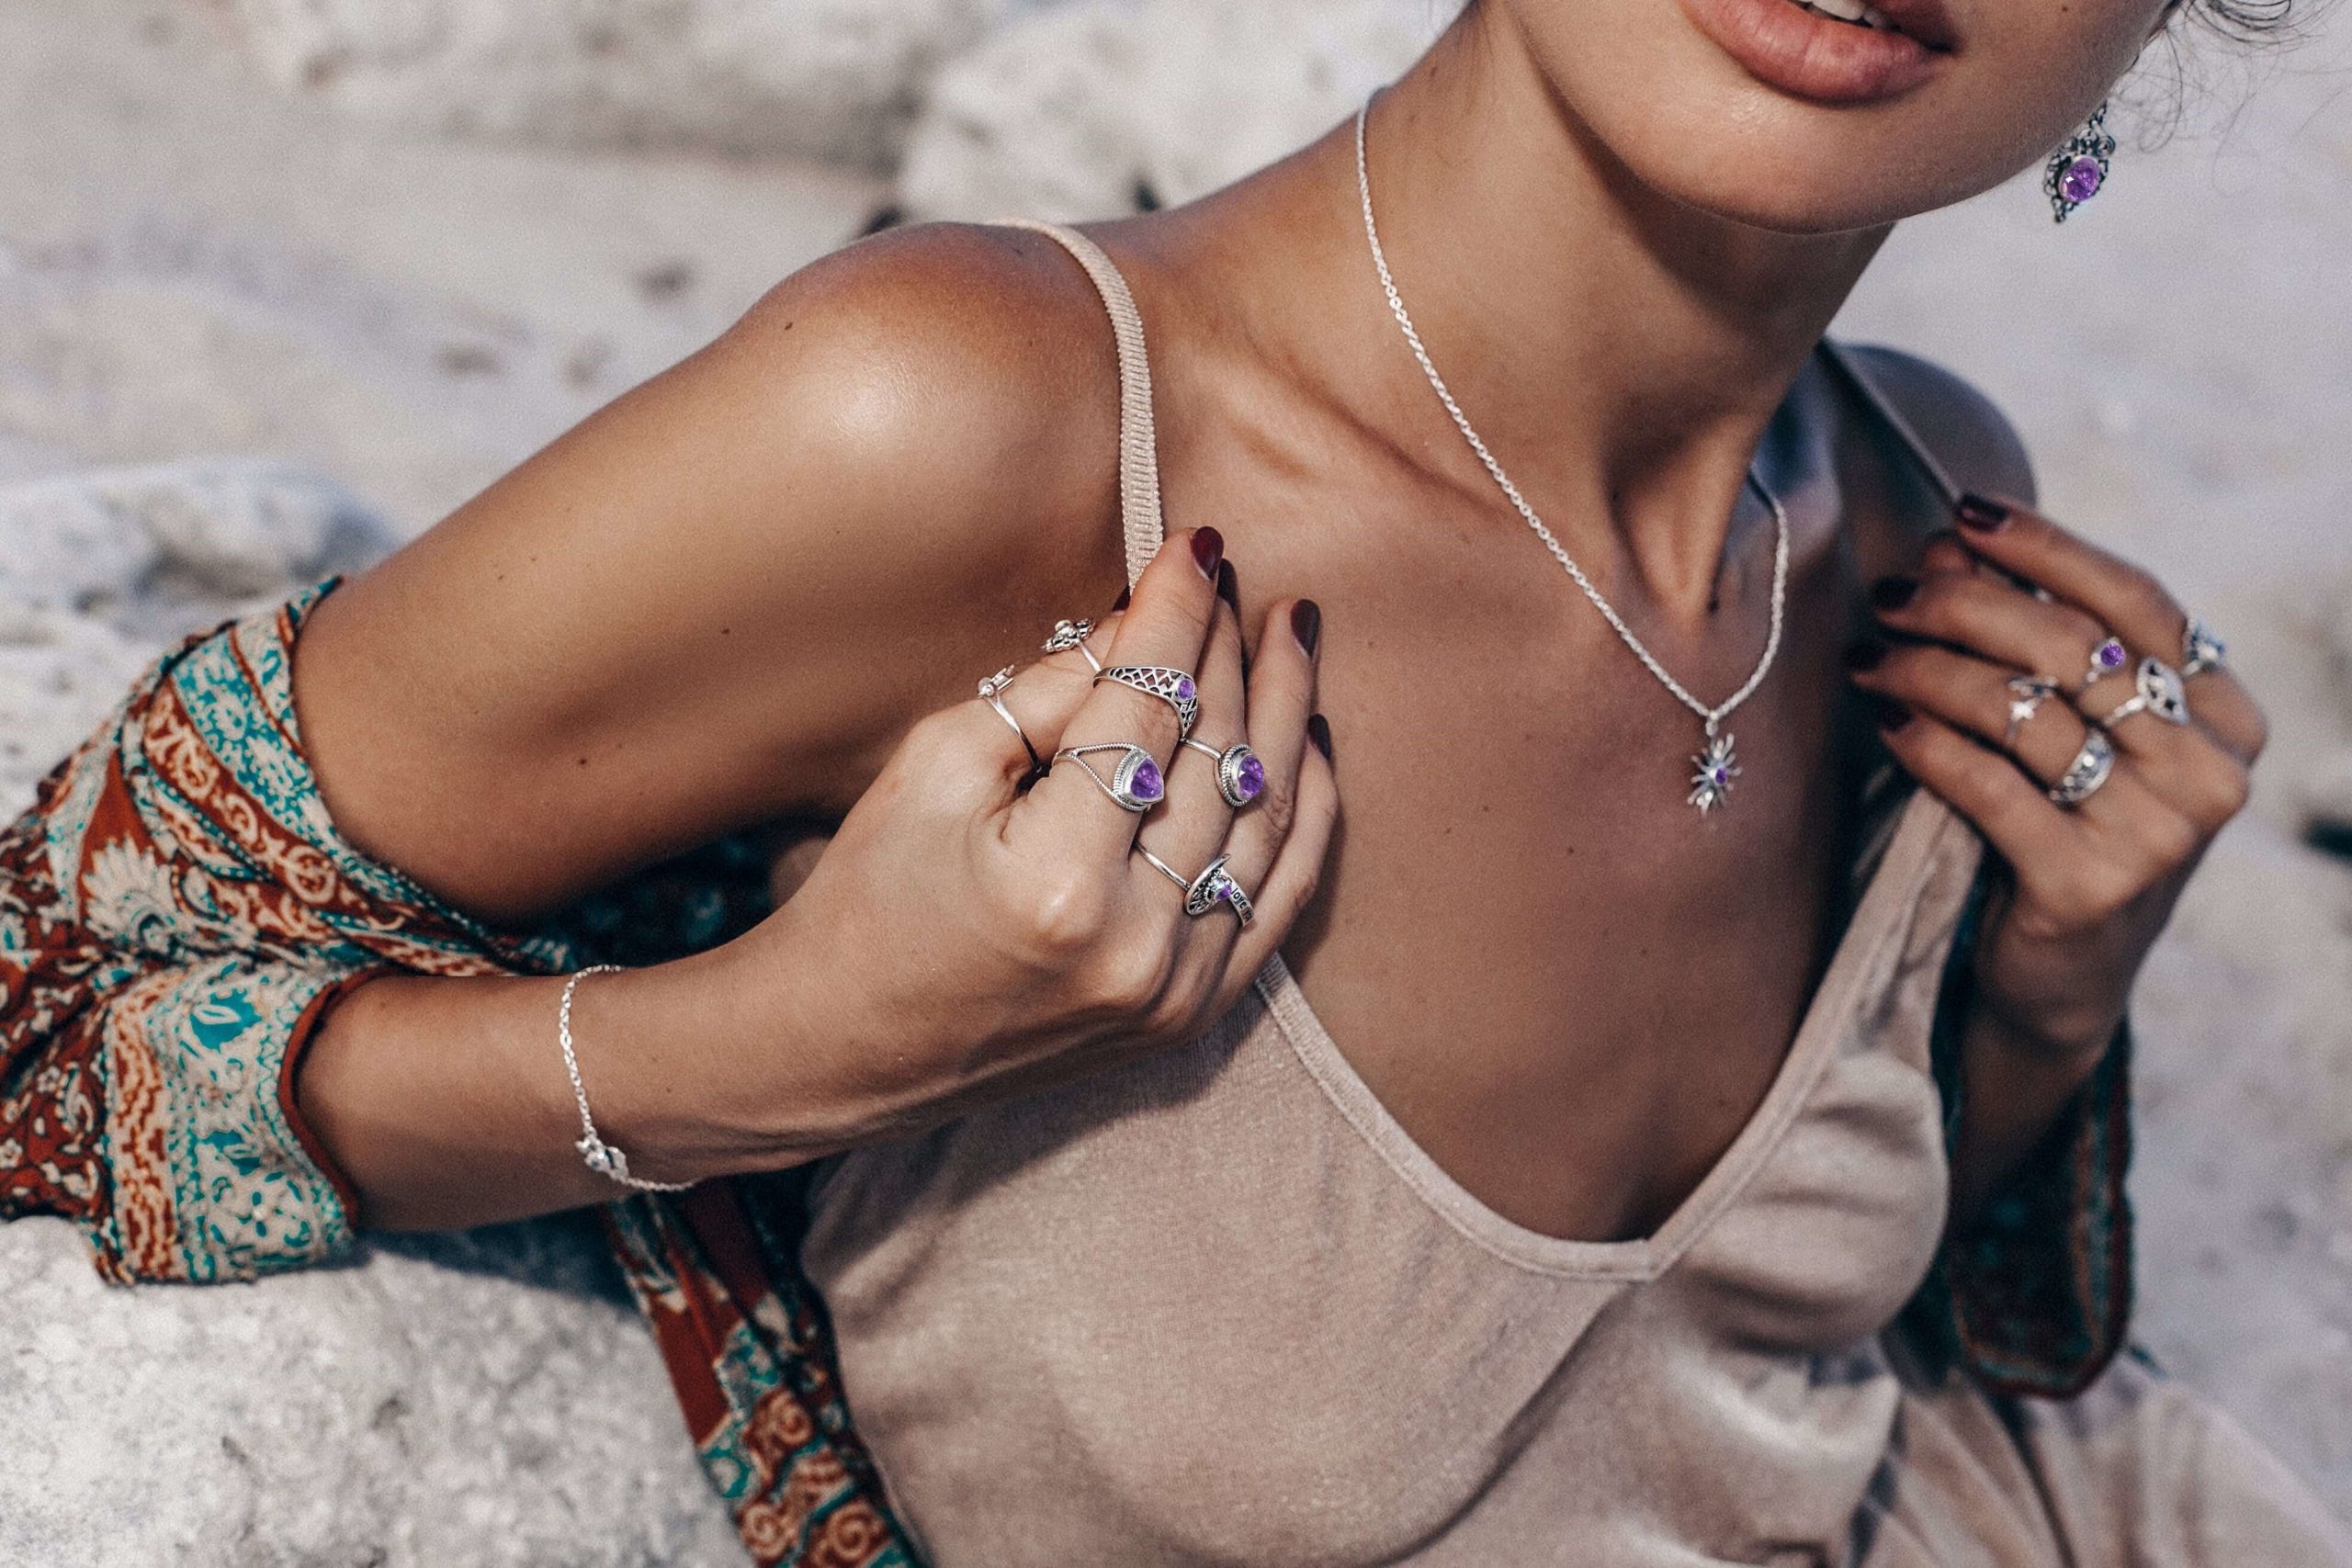 Green Amethyst Jewelry vs Charoite Jewelry: Which one would you Prefer?